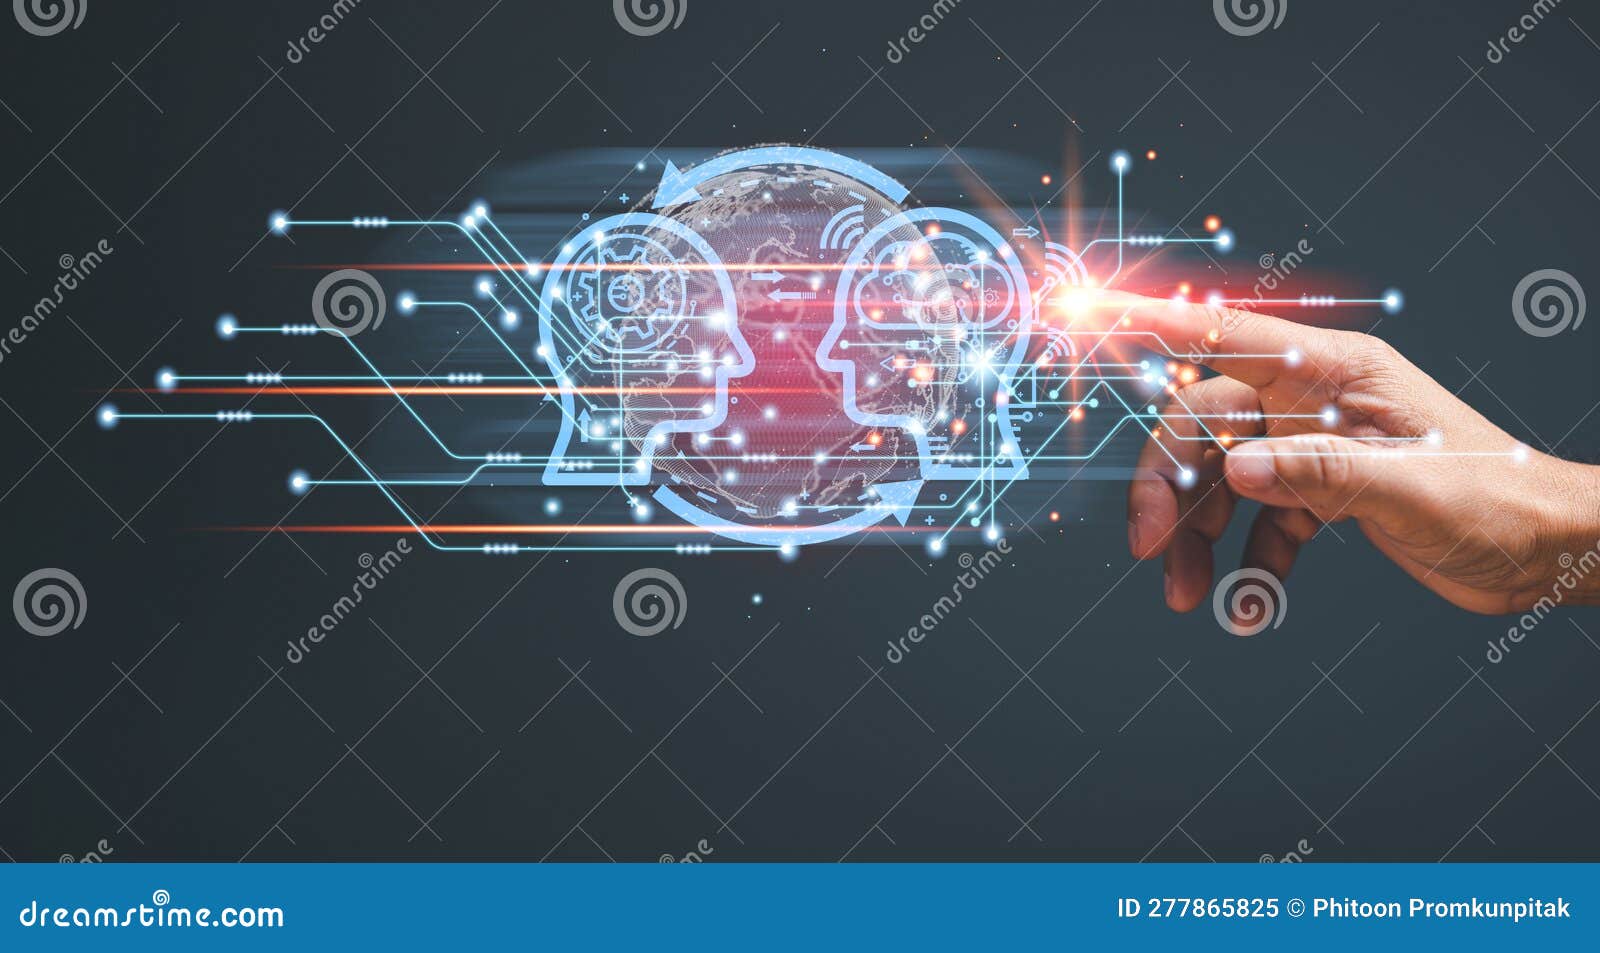 ai smart manufacturing and hitech to communicate with humans for upskill reskill. ai connection automation to global cyber network